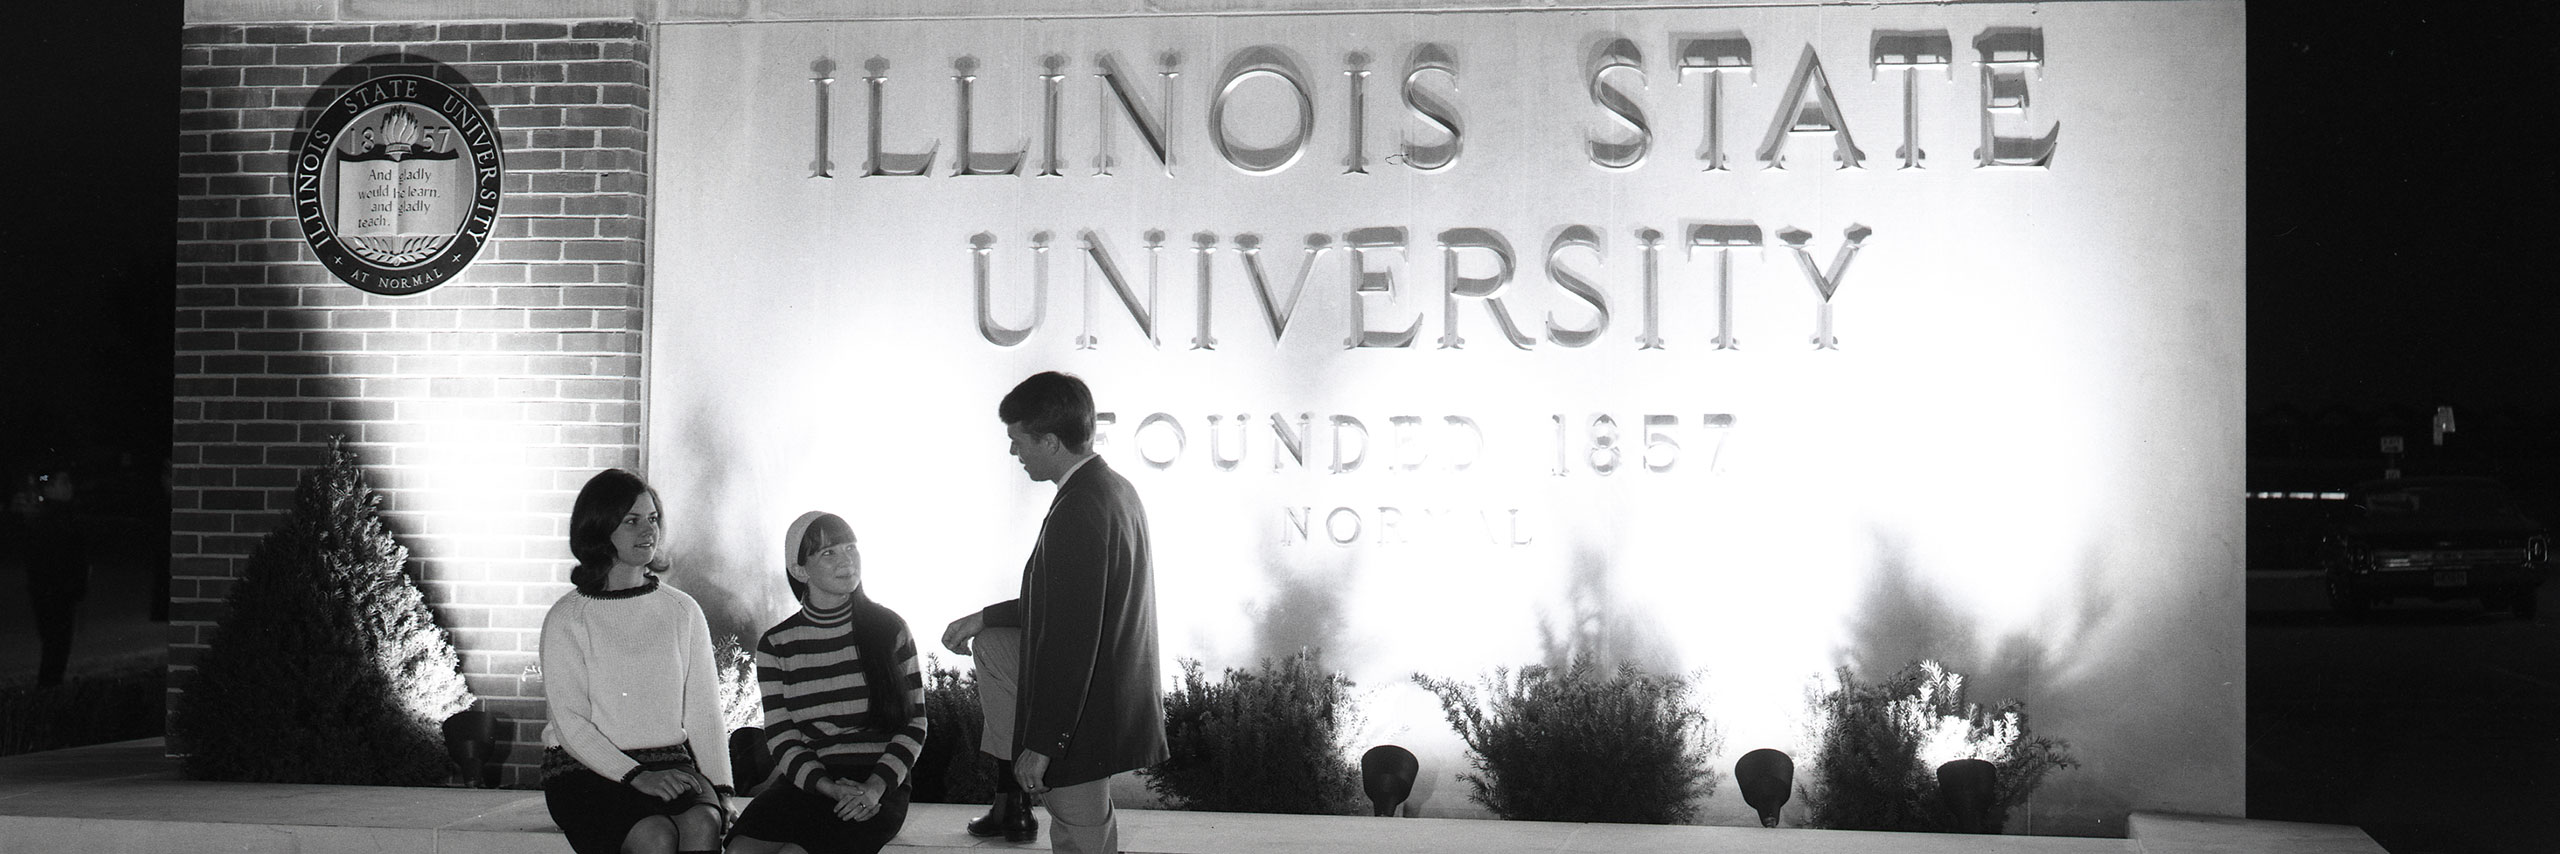 Students talking in front of the Illinois State sign